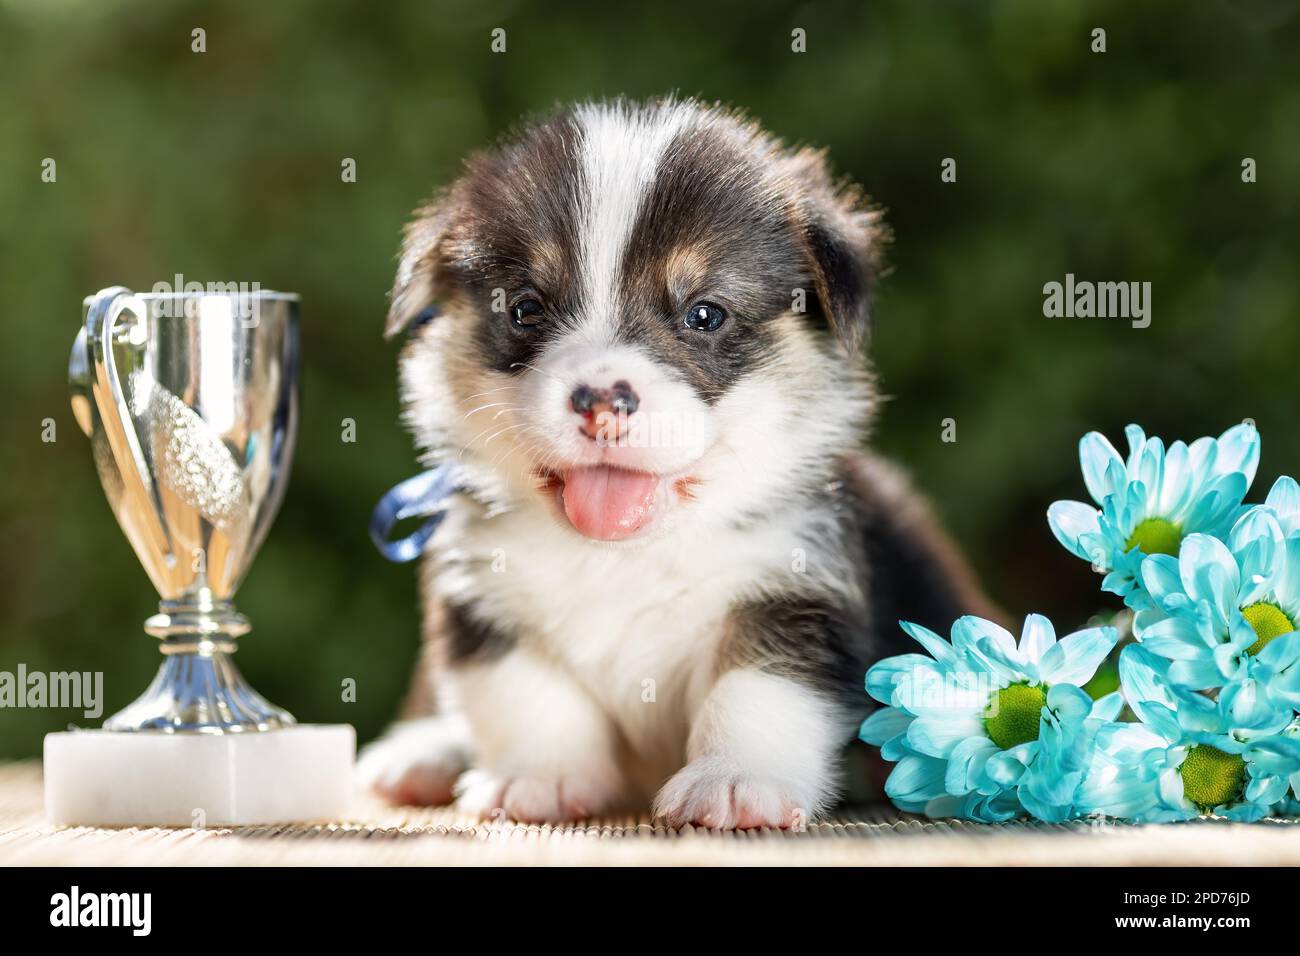 Cute little puppy of welsh corgi pembroke breed dog with winner silver cup and flowers. Stock Photo